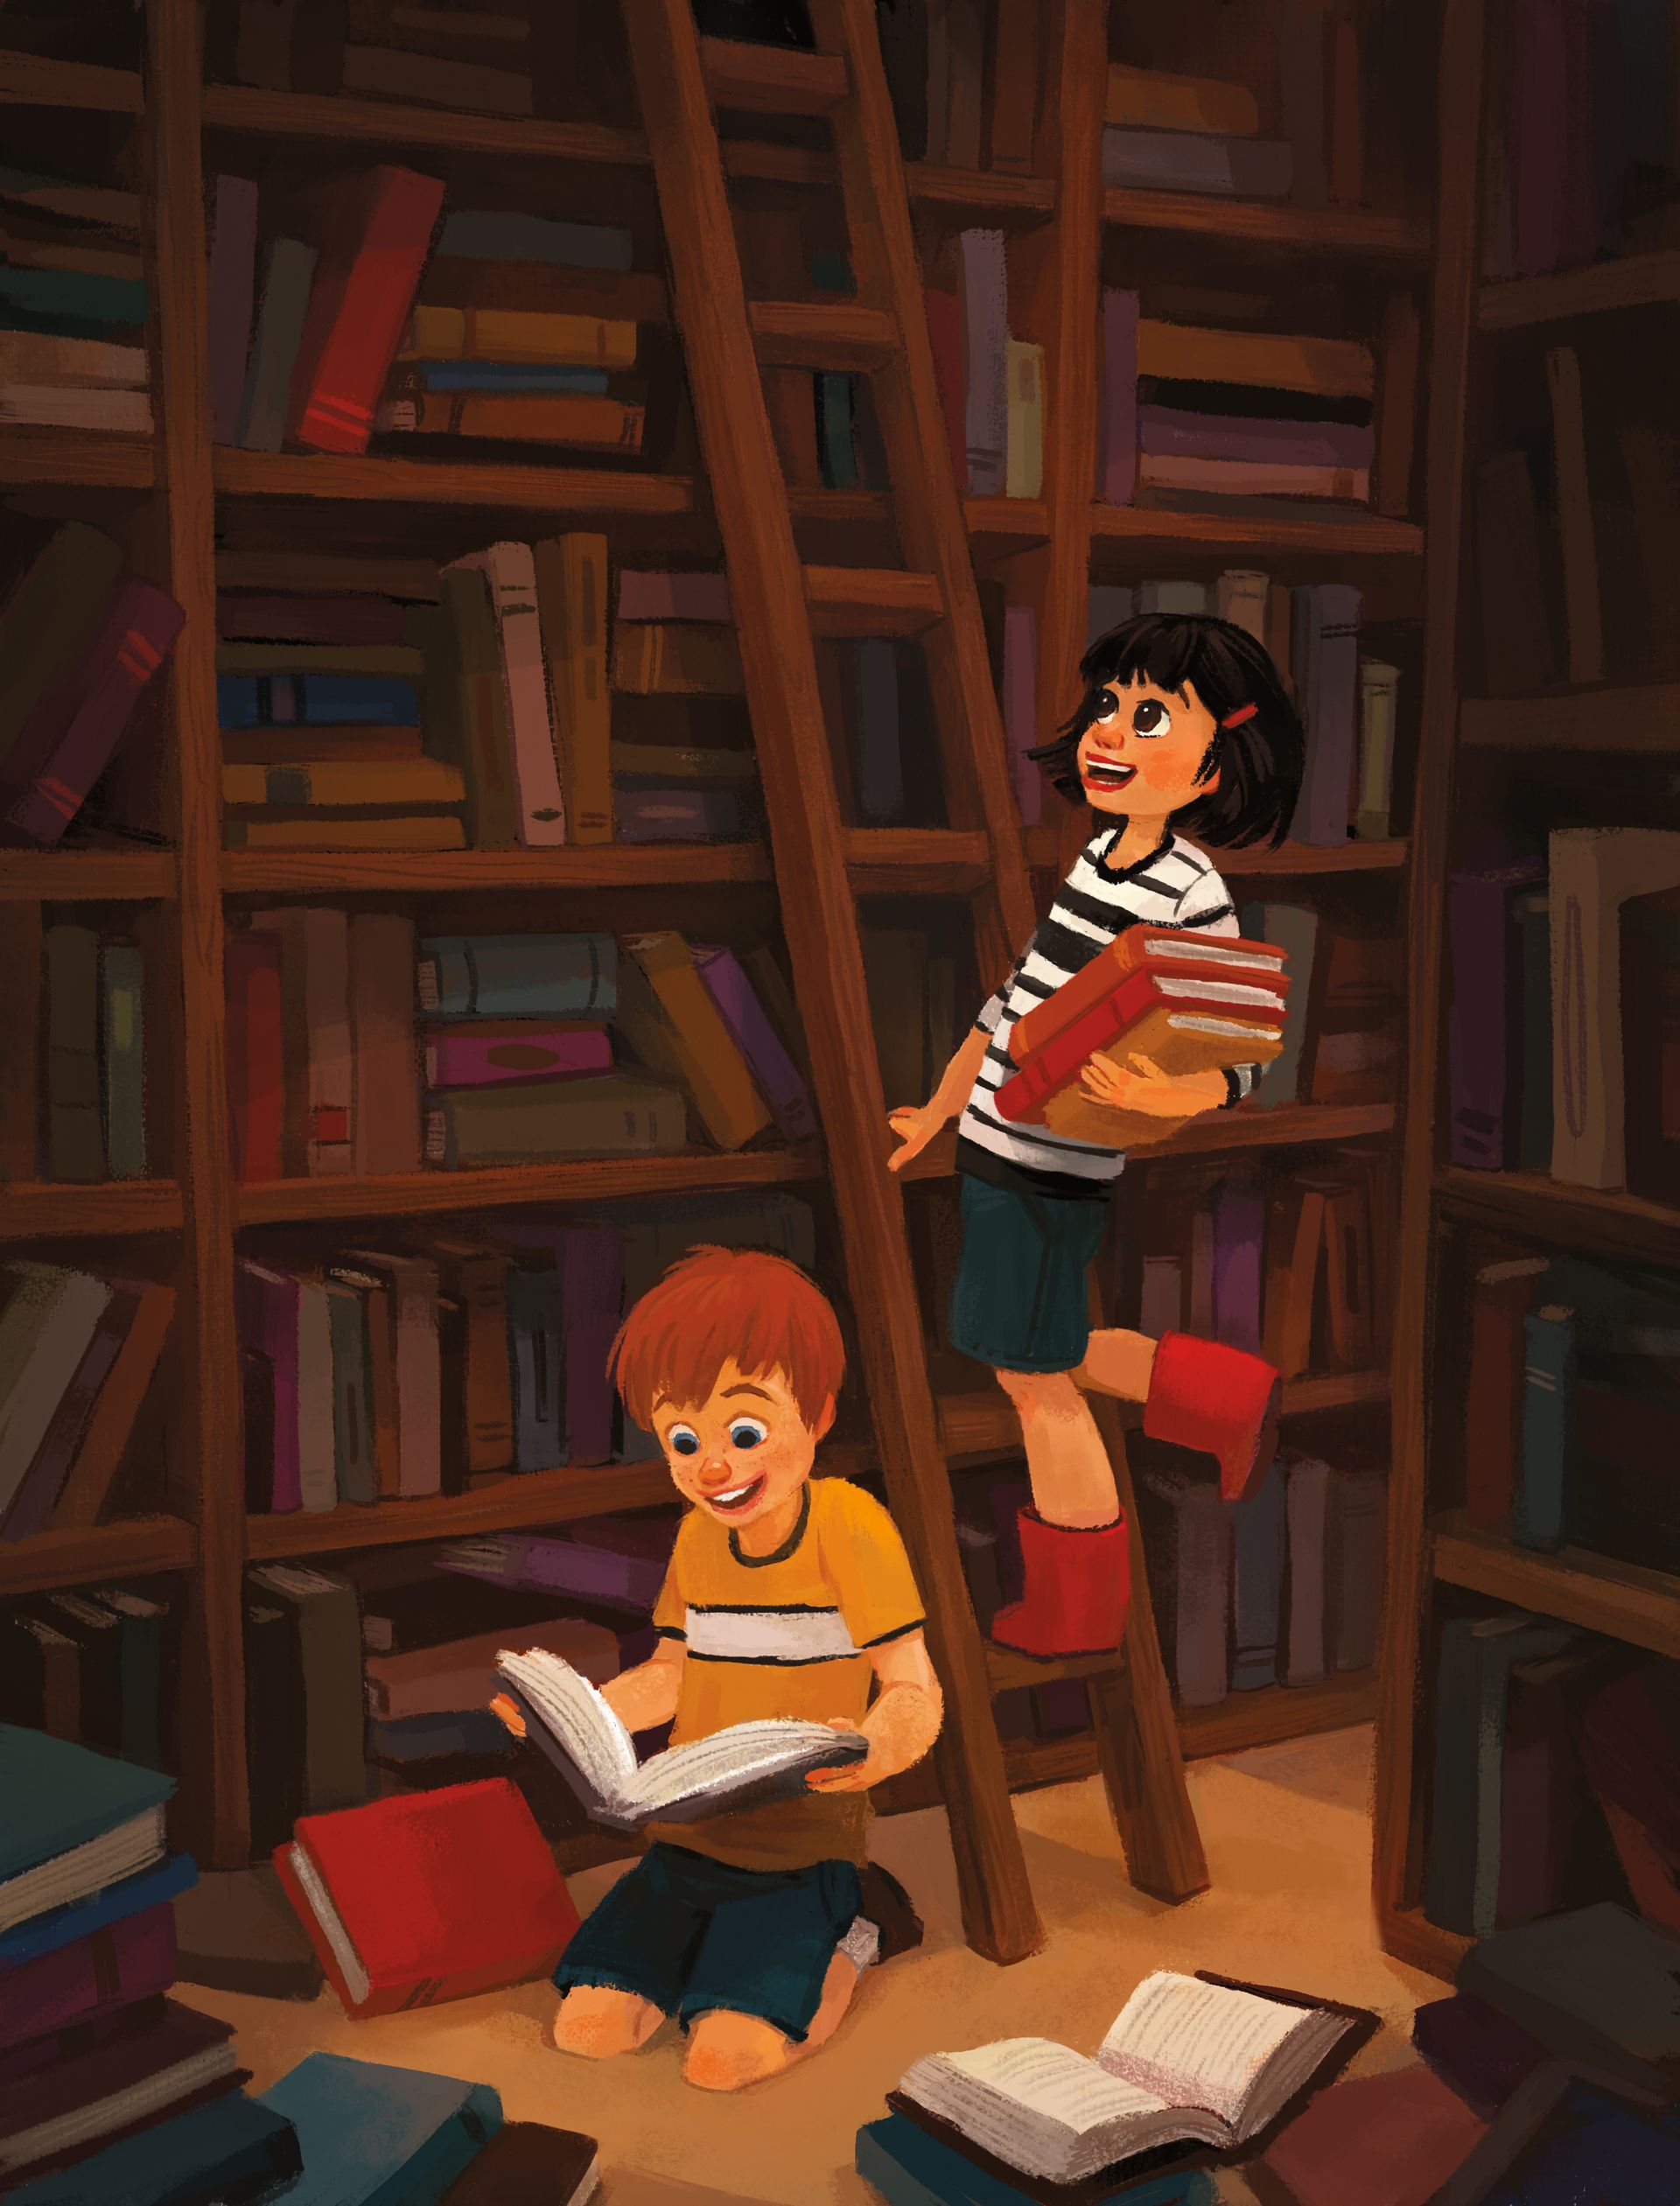 A boy and a girl pull books from large bookshelves.